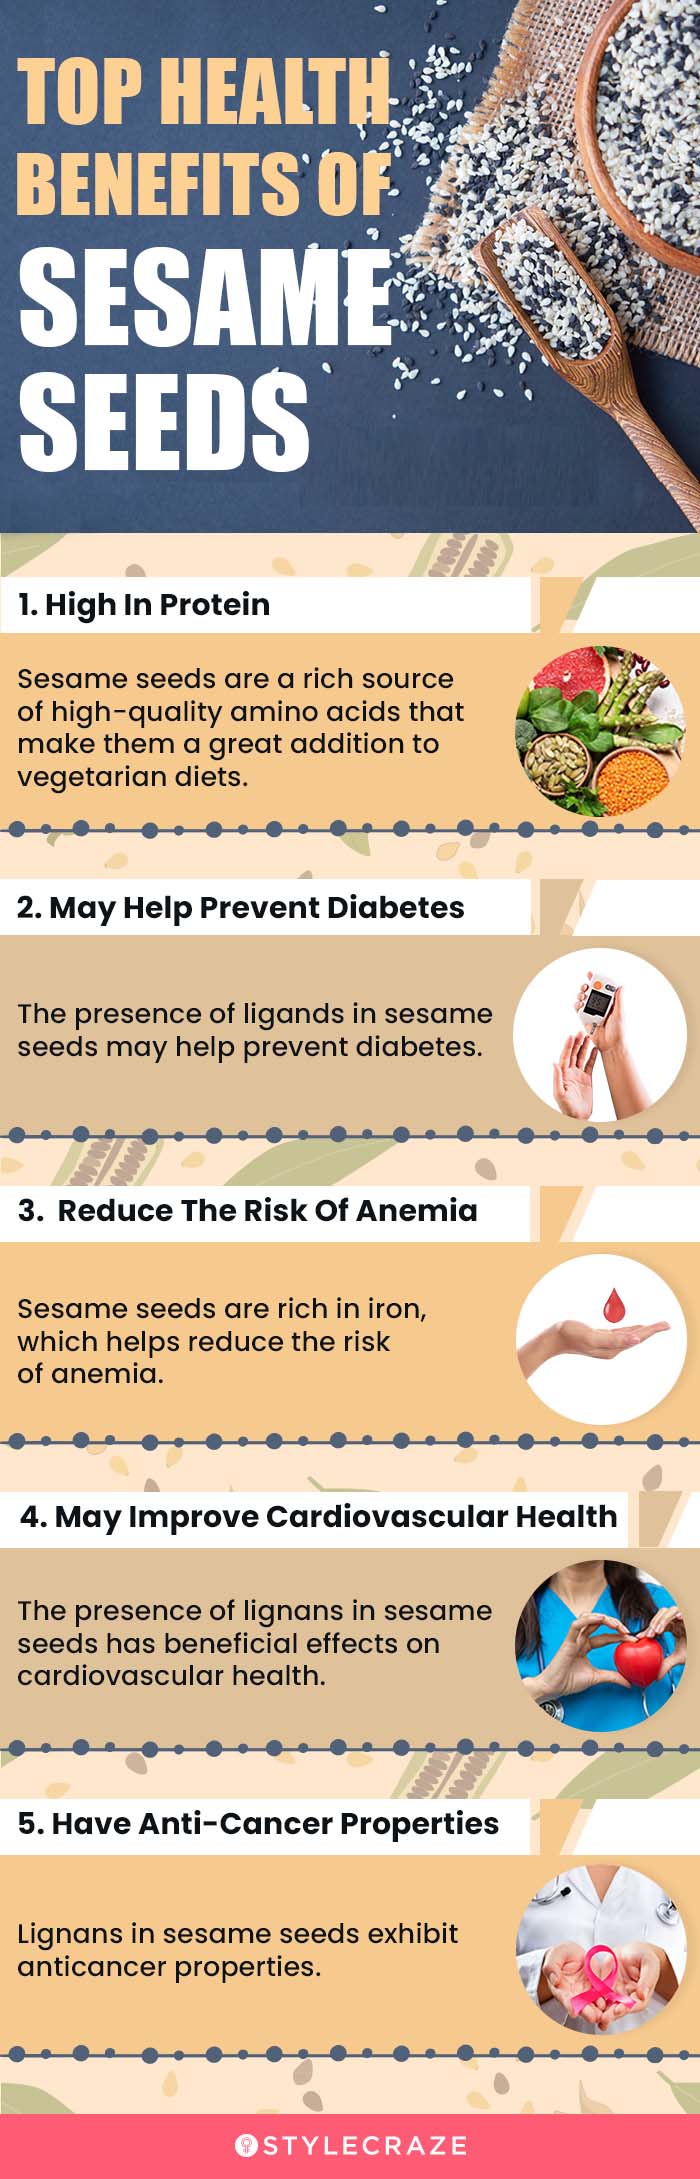 top health benefits of sesame seeds (infographic)